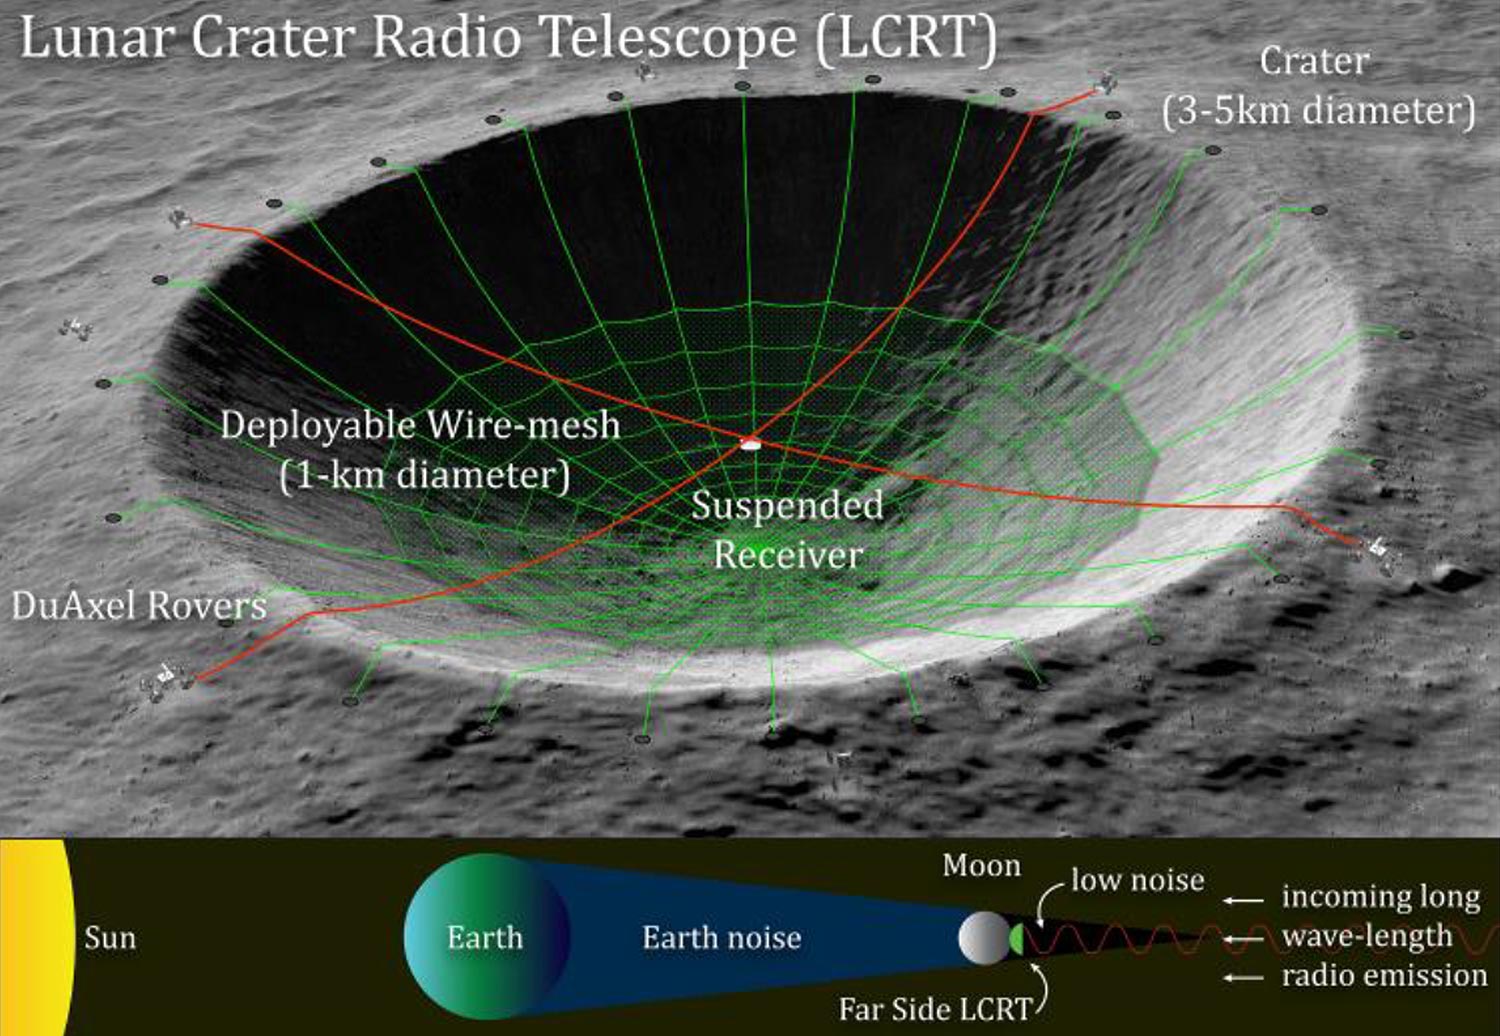 galileo telescope discovered craters and mare on mars